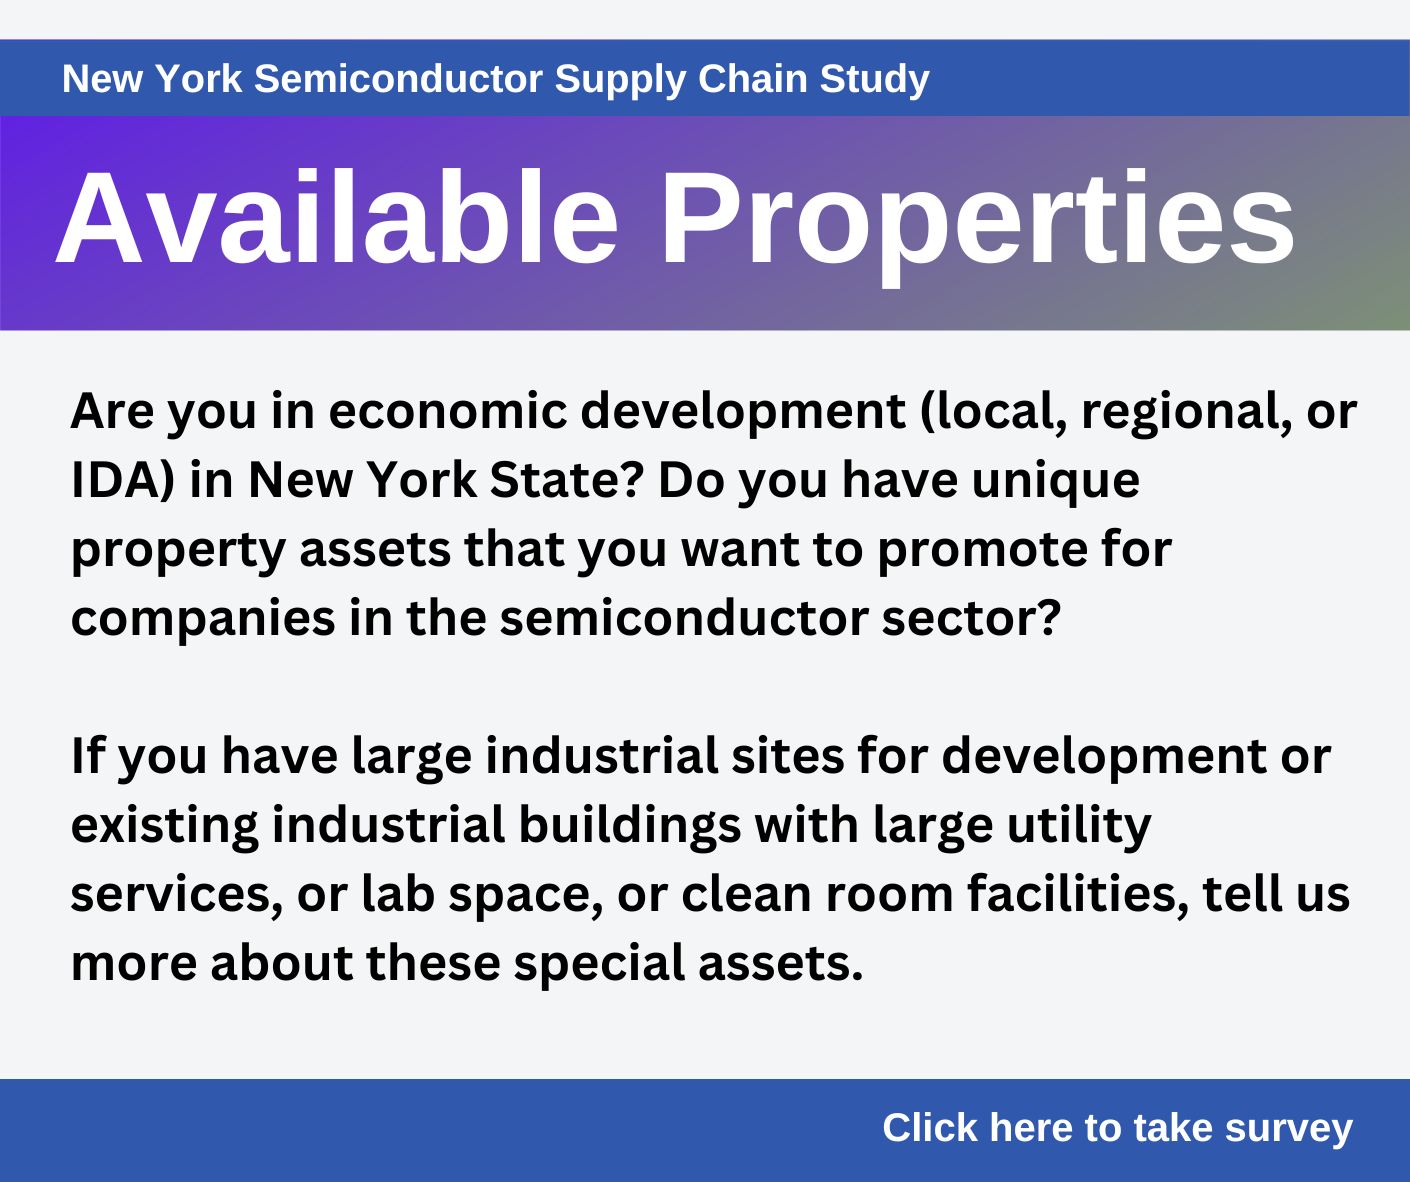 Available Properties - Are you in economic development (local, regional, or IDA) in New York State? Do you have unique property assets that you want  to promote for companies in the semiconductor sector? If you have large industrial sites for development or existing industrial buildings with large utility services, or lab space, or clean room facilities, tell us more about these special assets.